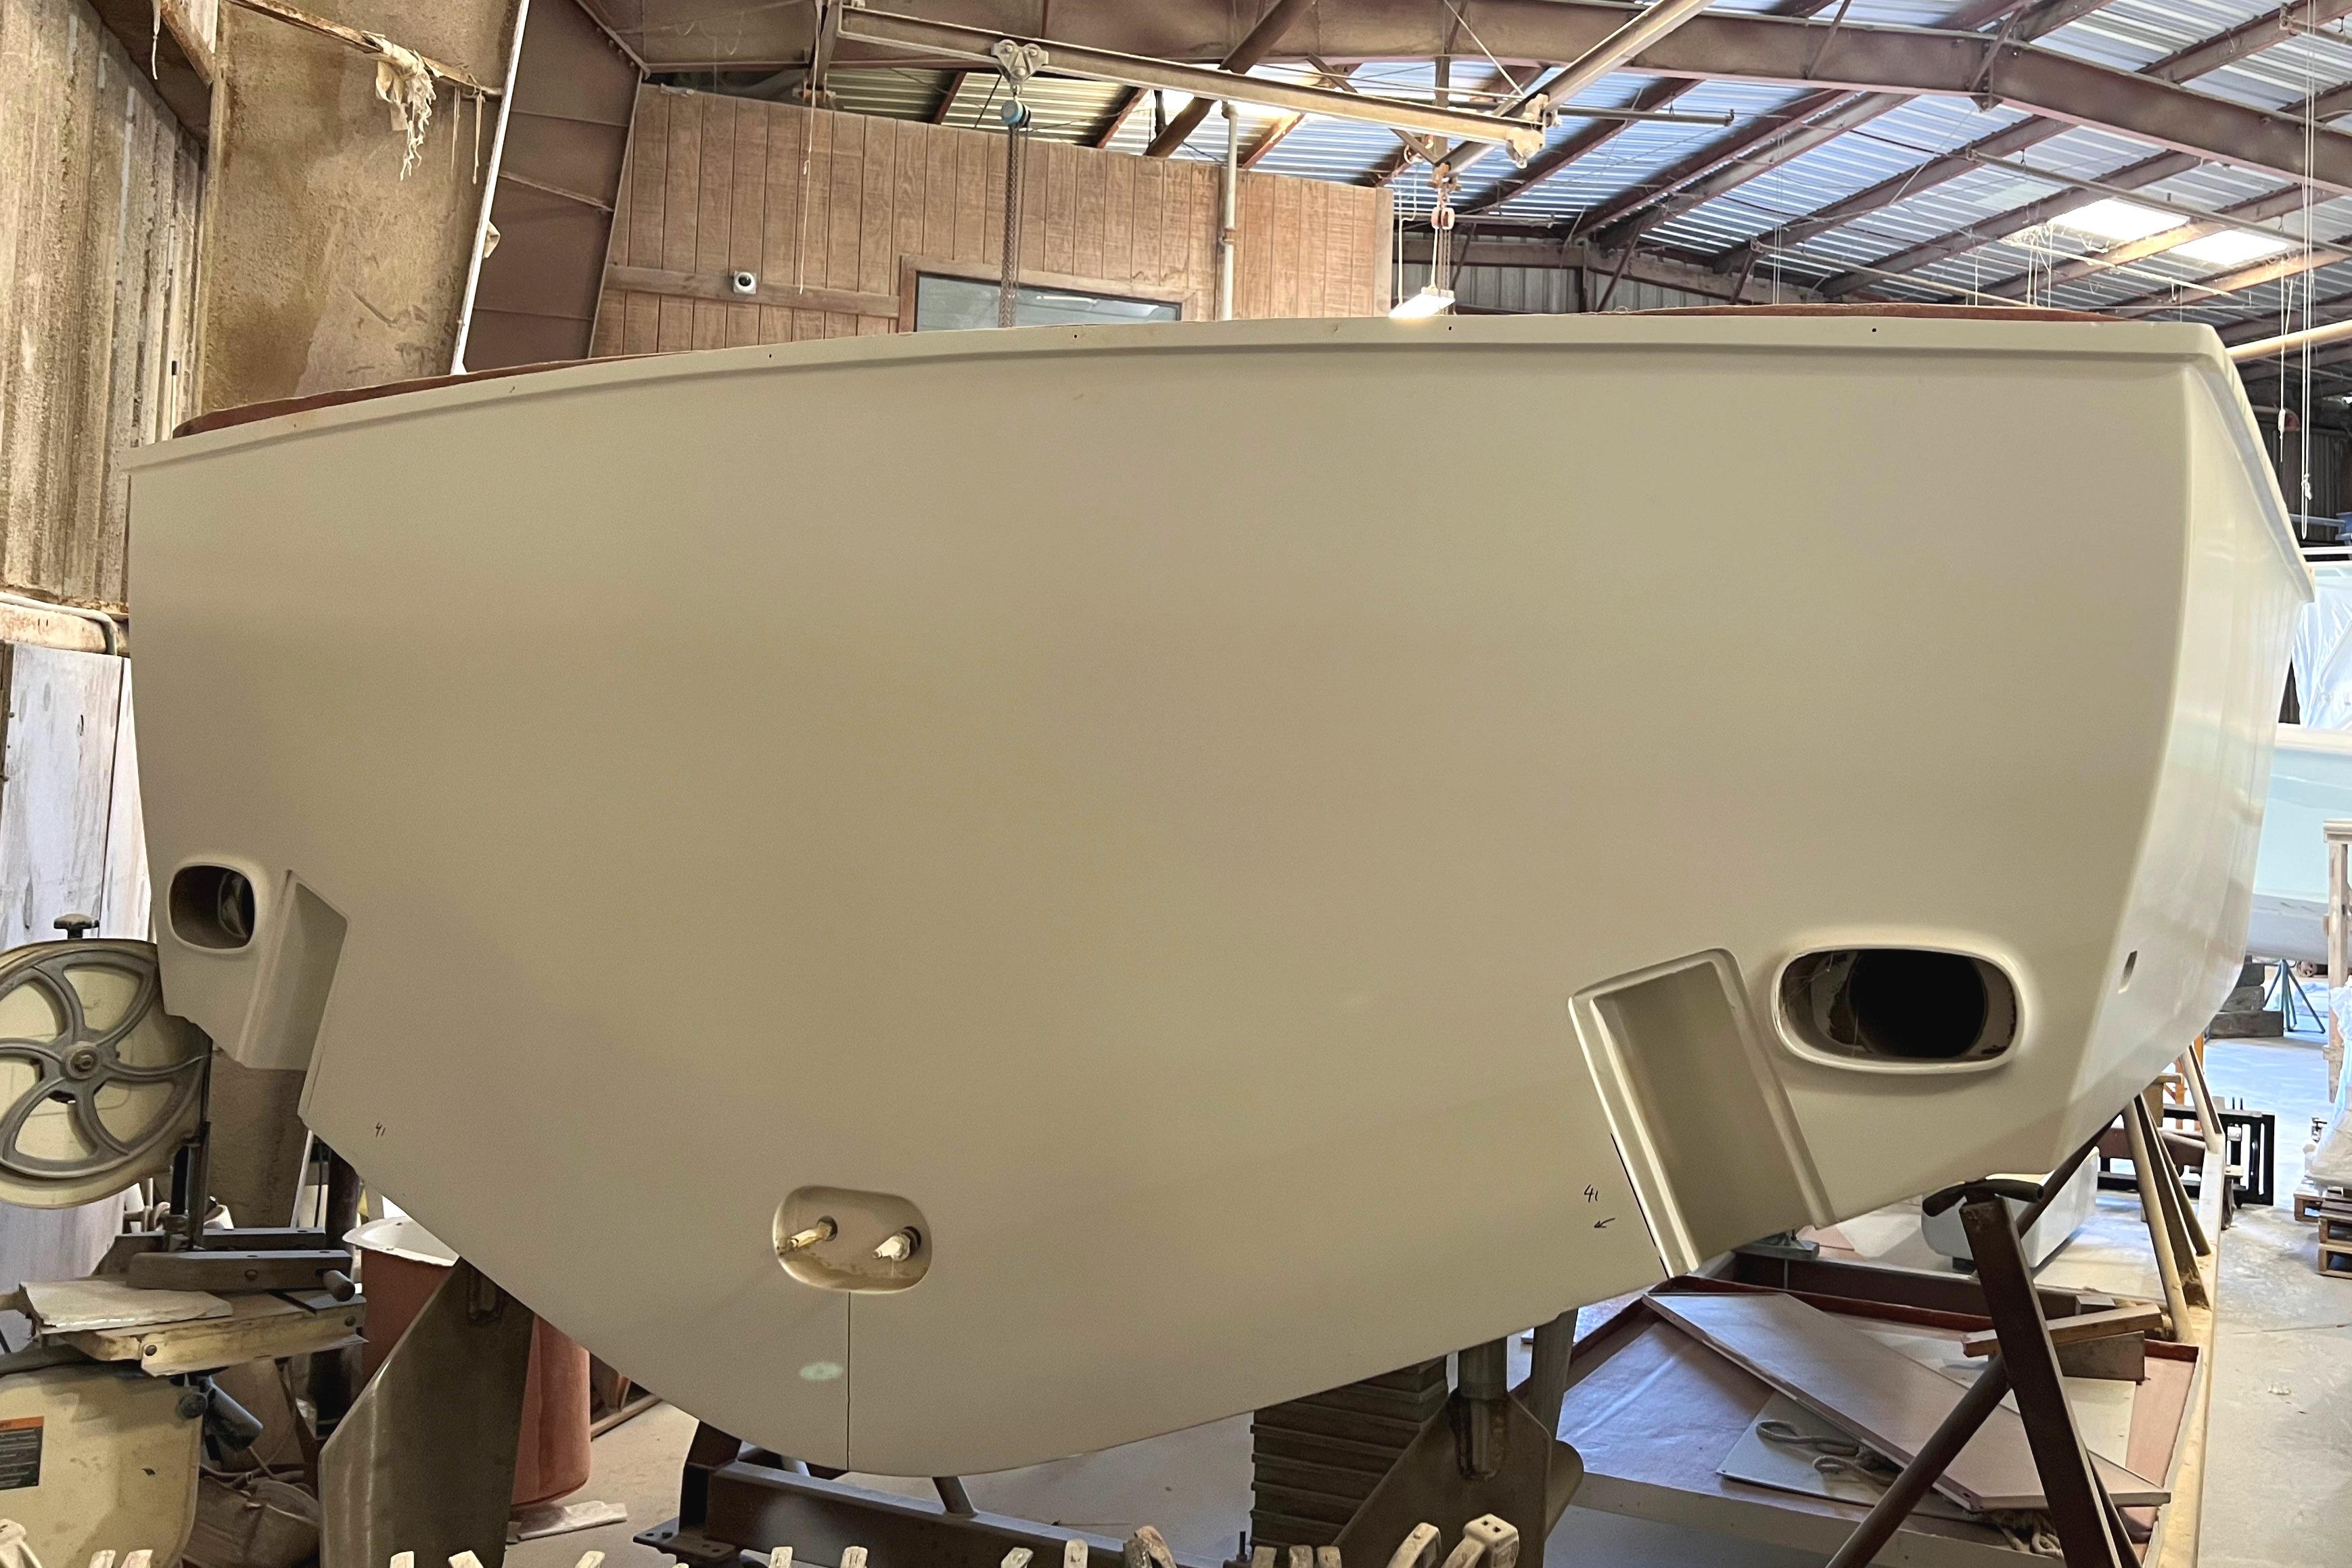 Transom with new oval exhaust ports